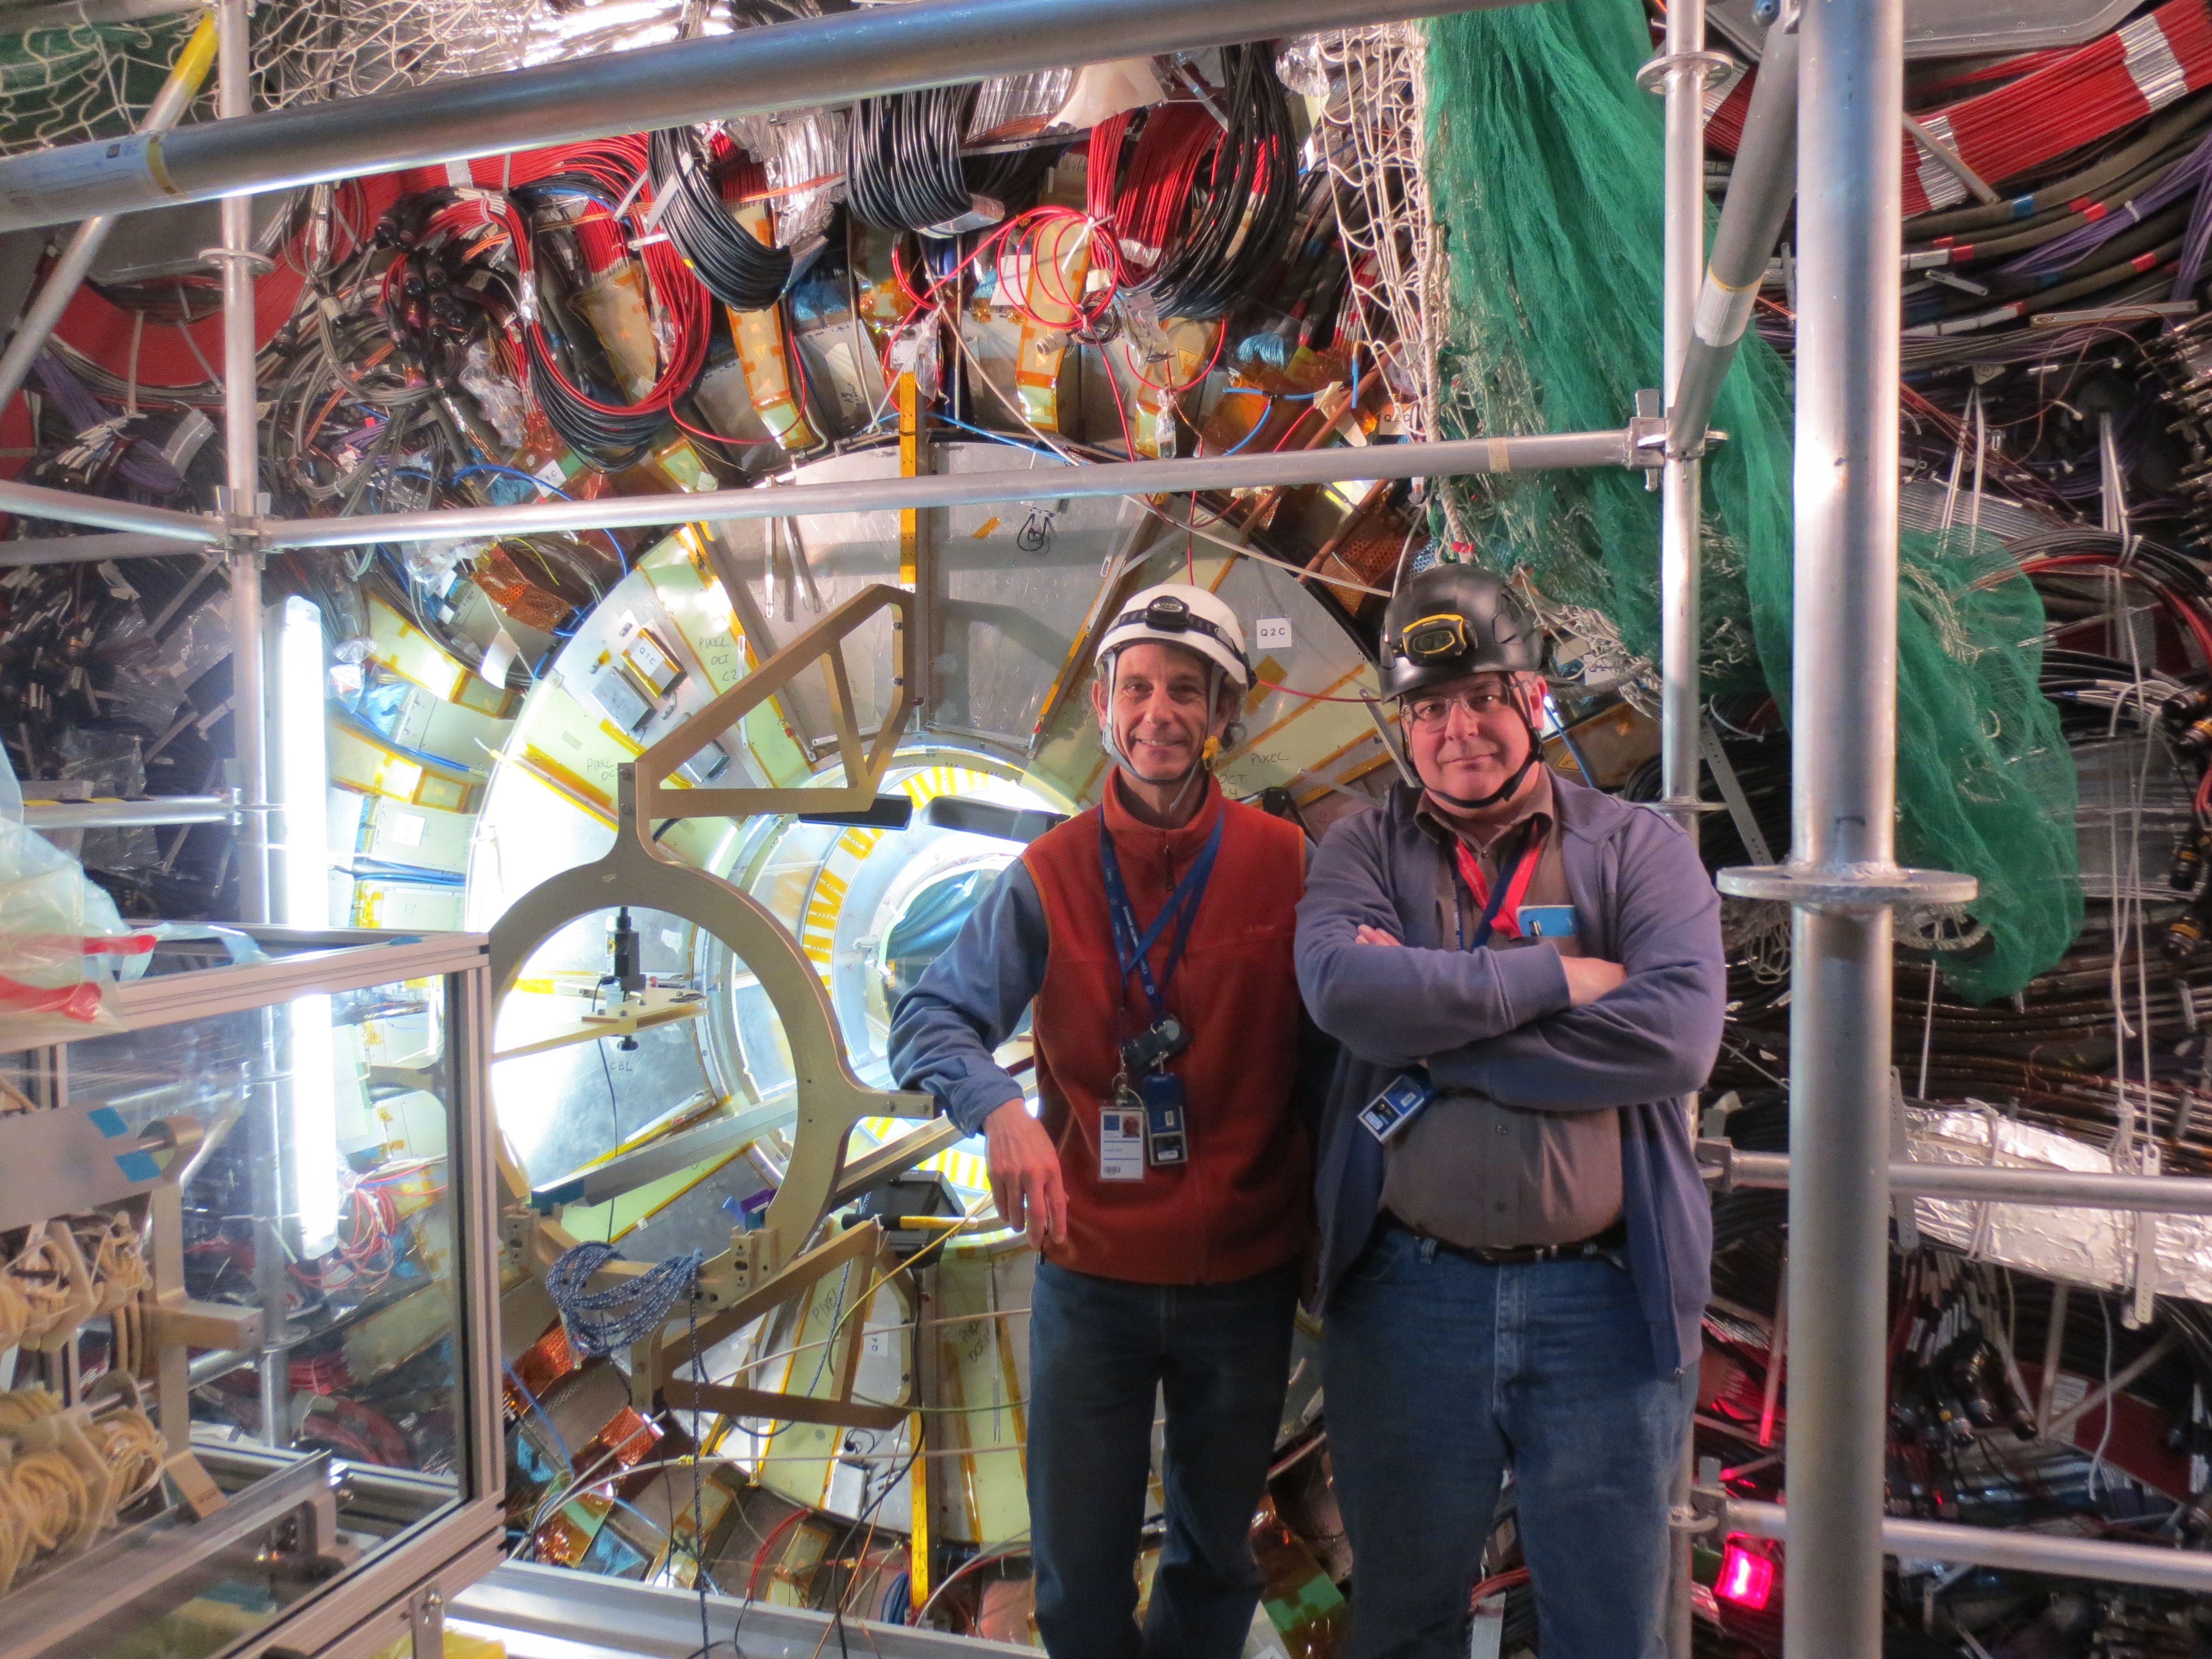 Prof tasked with patching up Hadron collider in Geneva